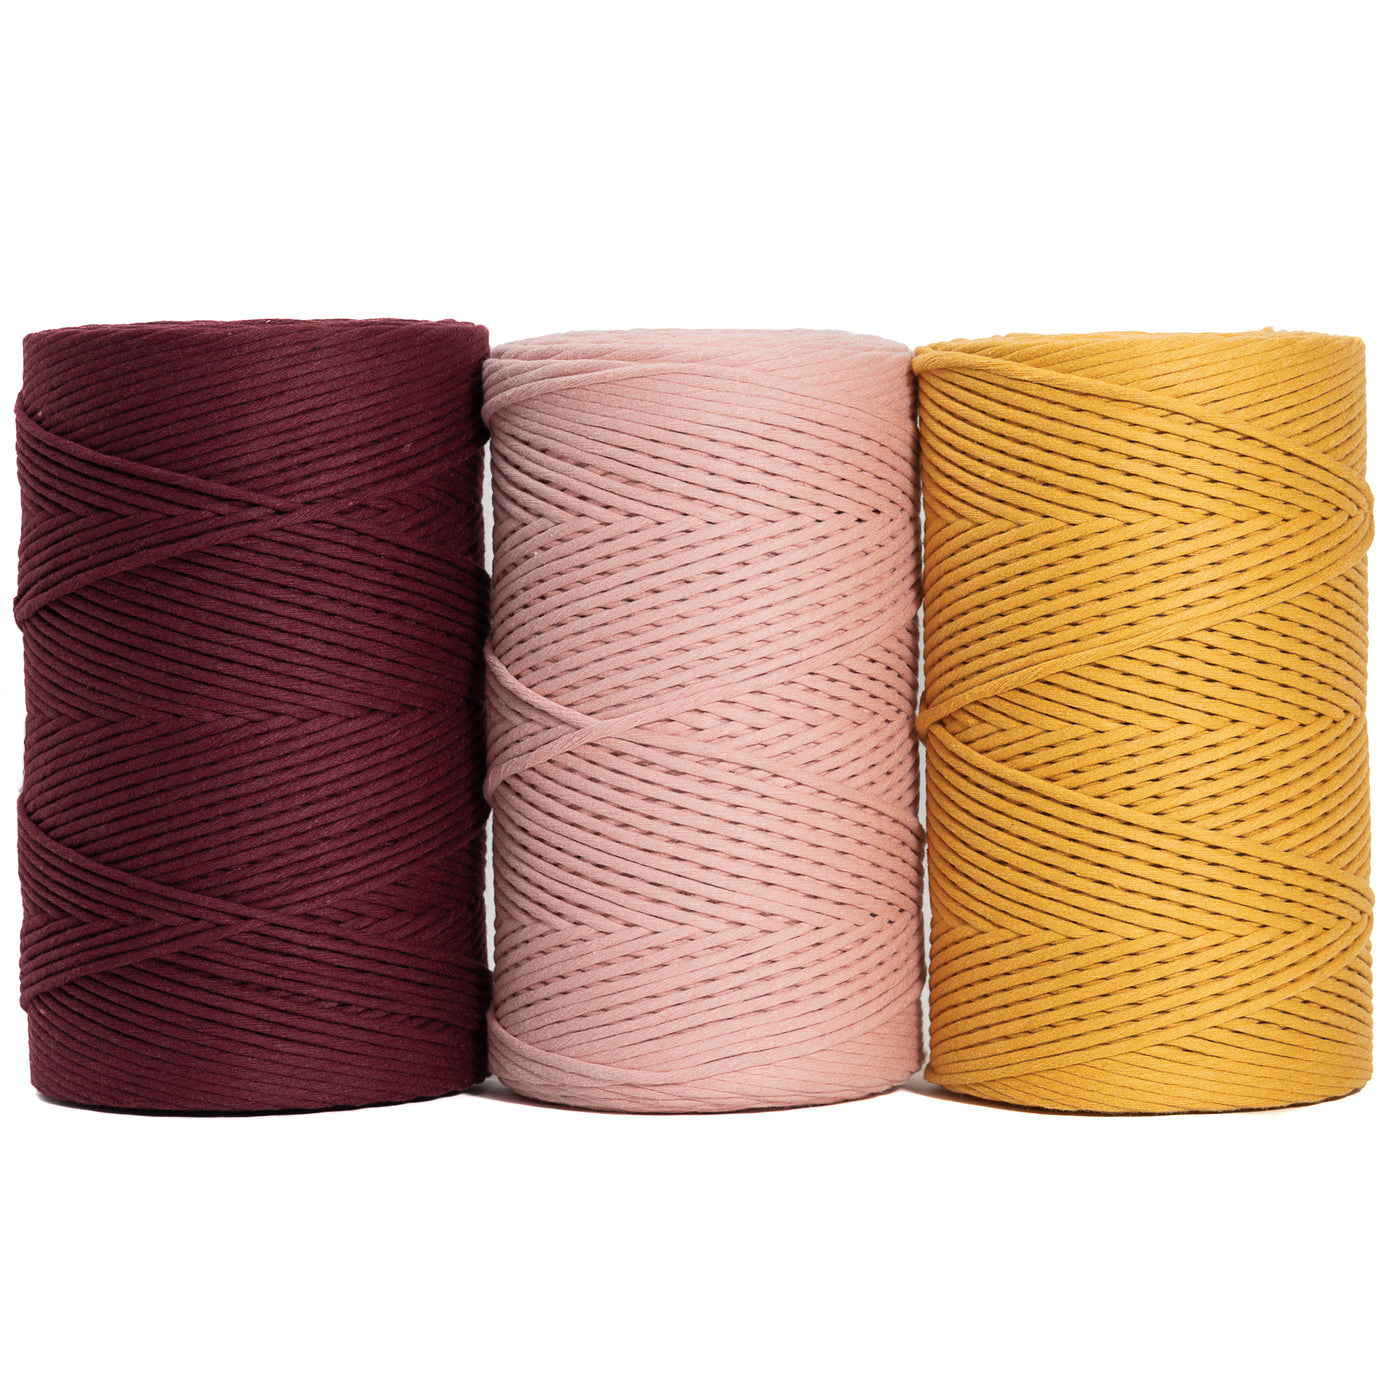 CURATED BUNDLE - BURGUNDY, PALE PINK & OCHER